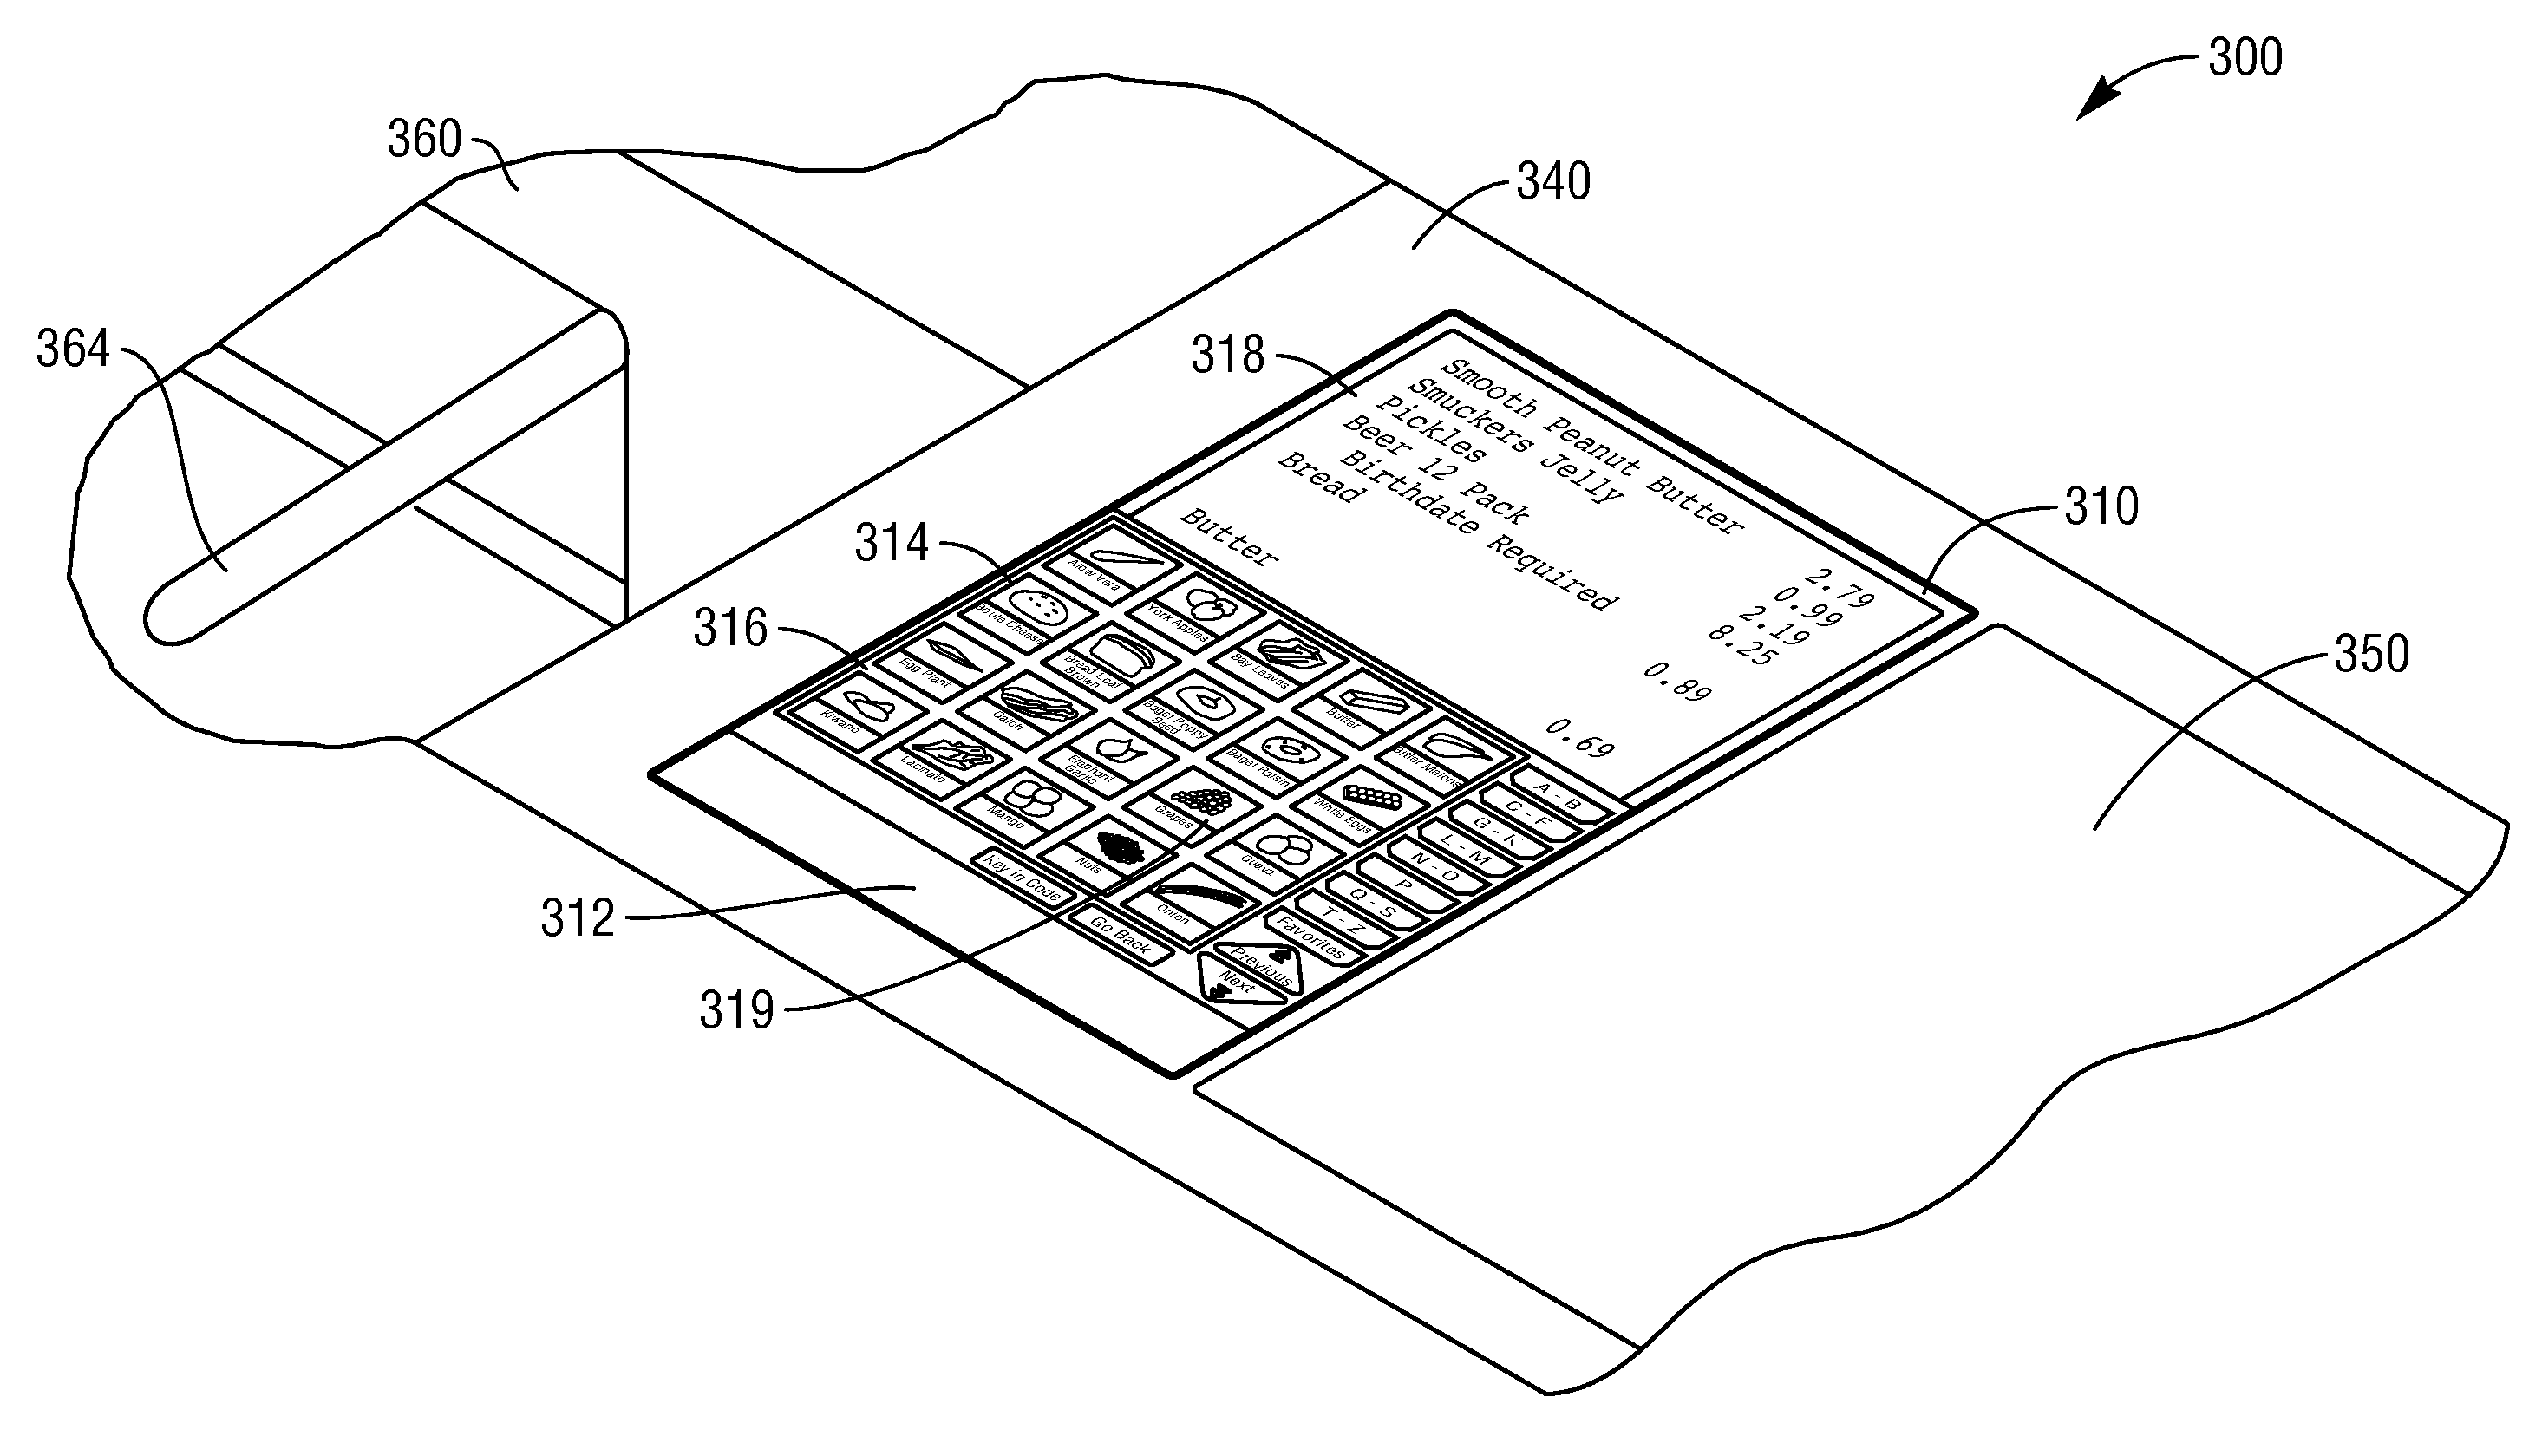 Integrated Scanner, Scale, and Touchscreen Display